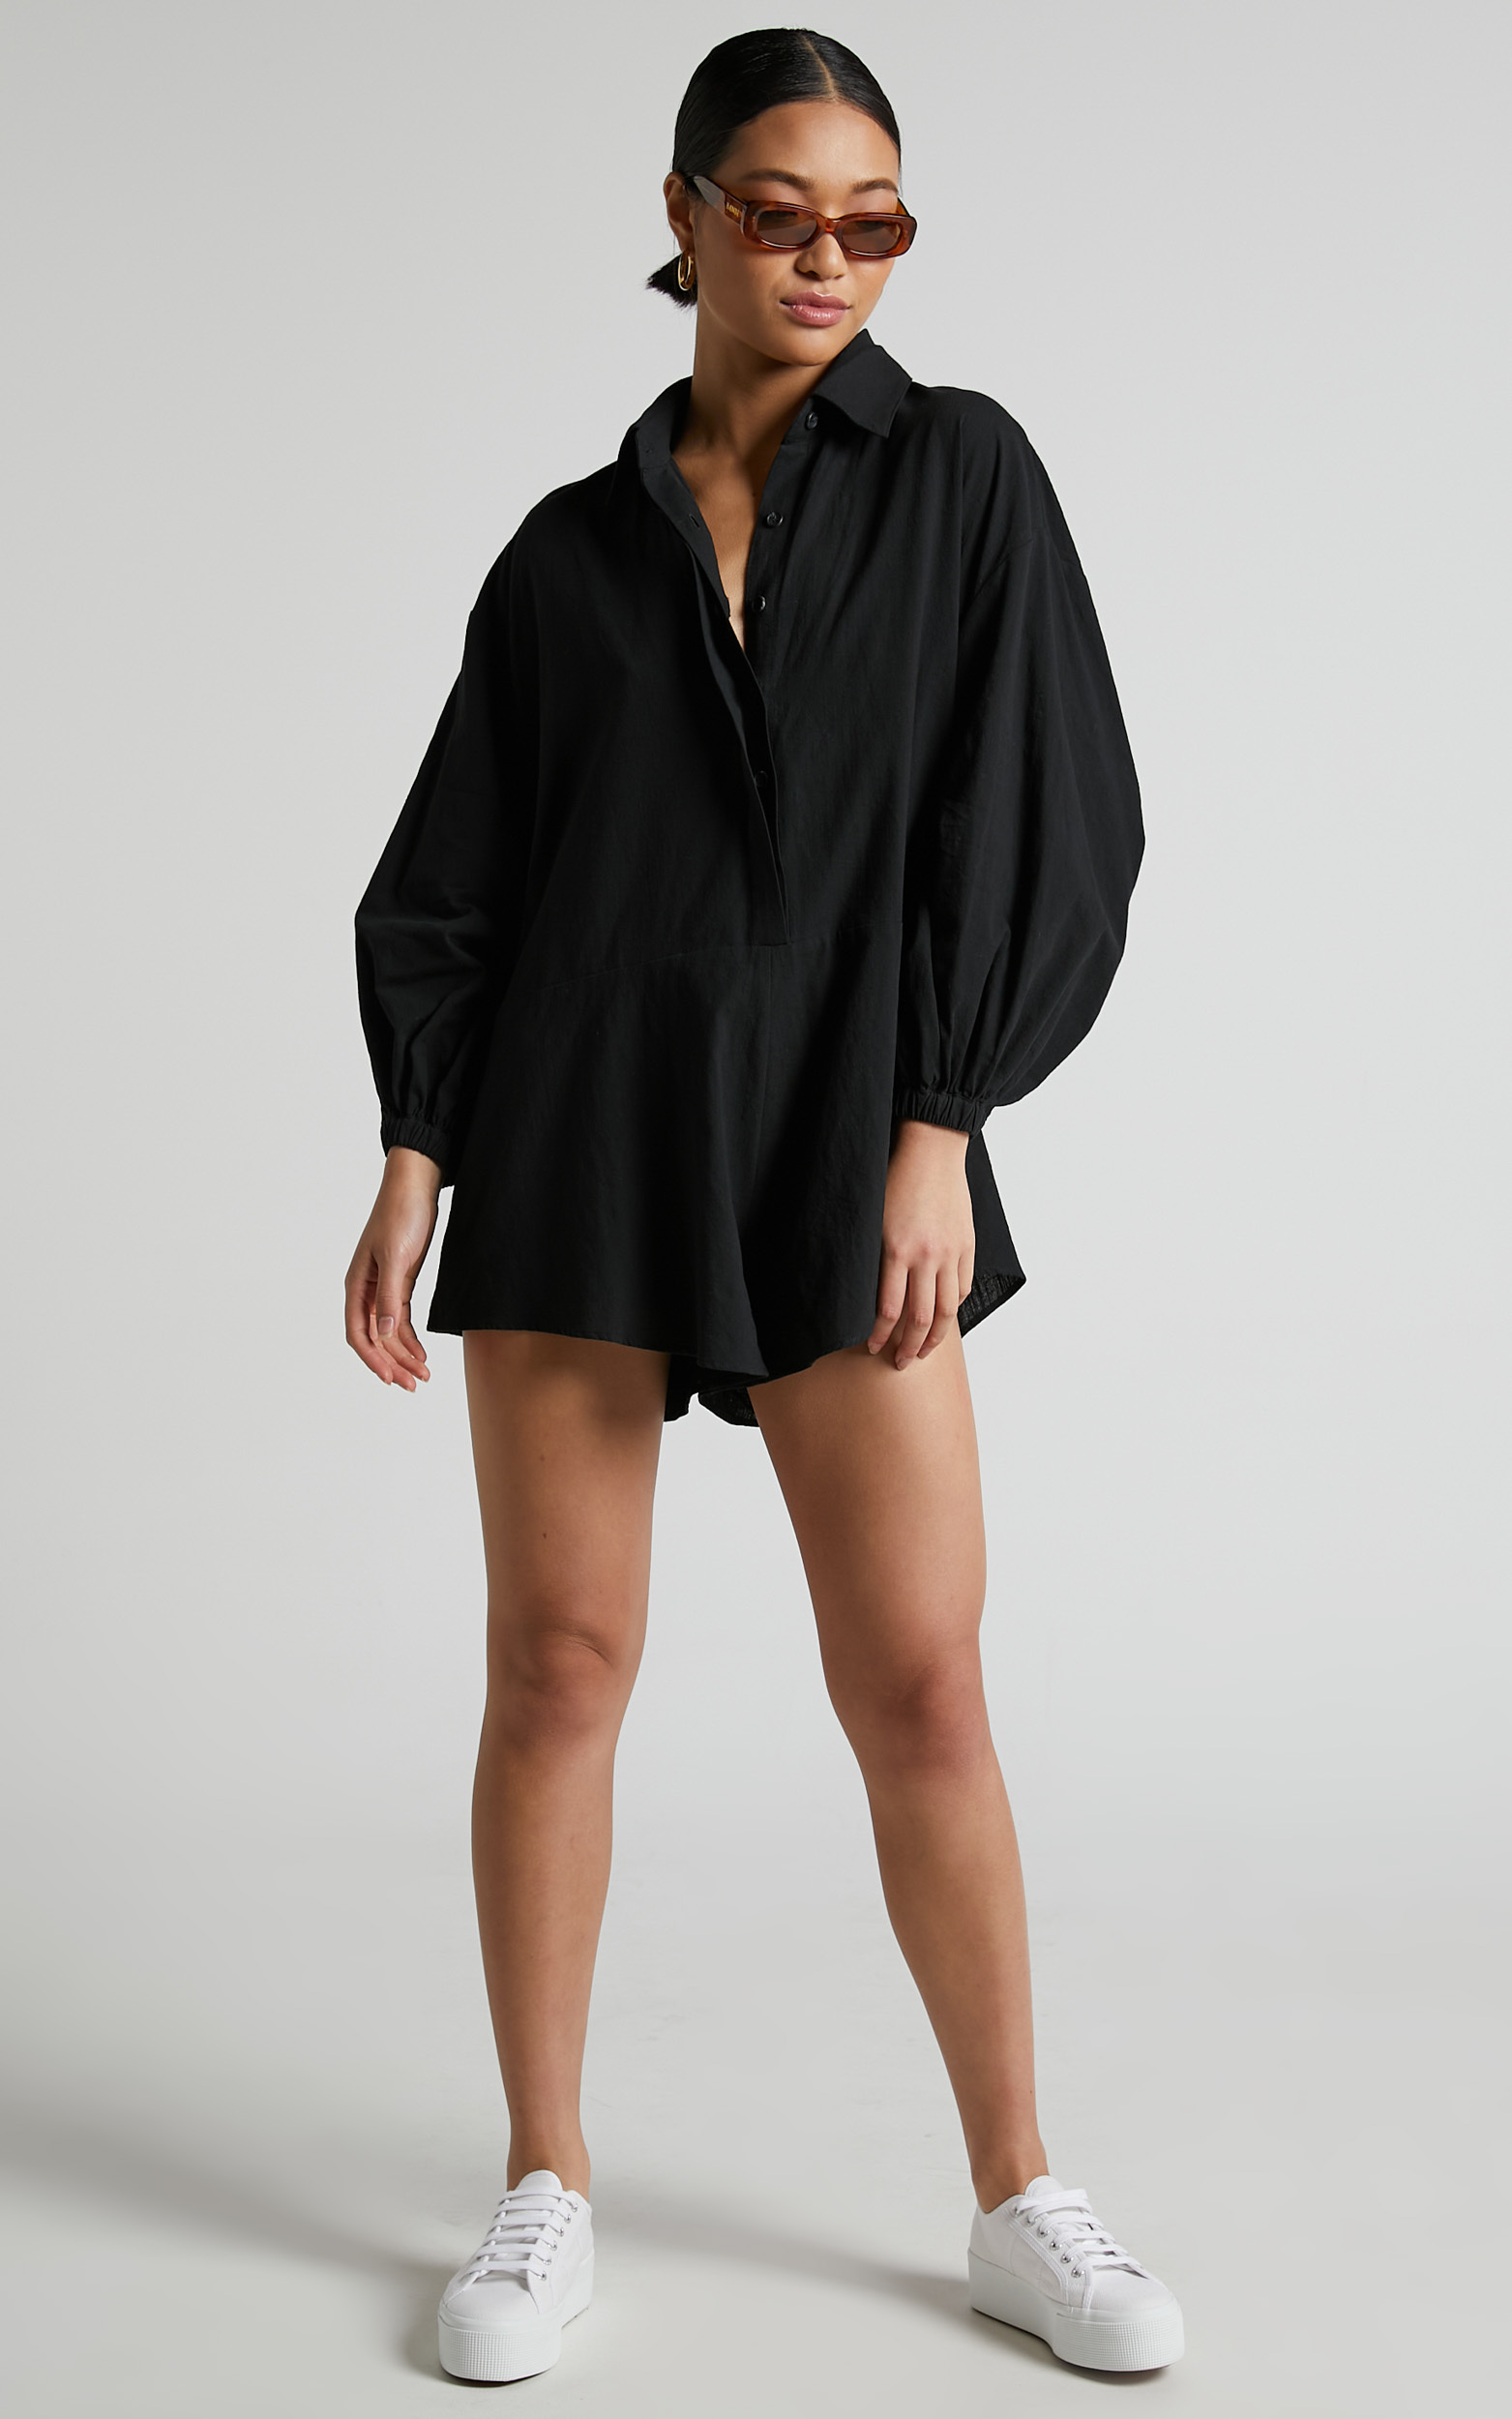 Anka Playsuit - Relaxed Button Front Shirt Playsuit in Black - 04, BLK1, hi-res image number null